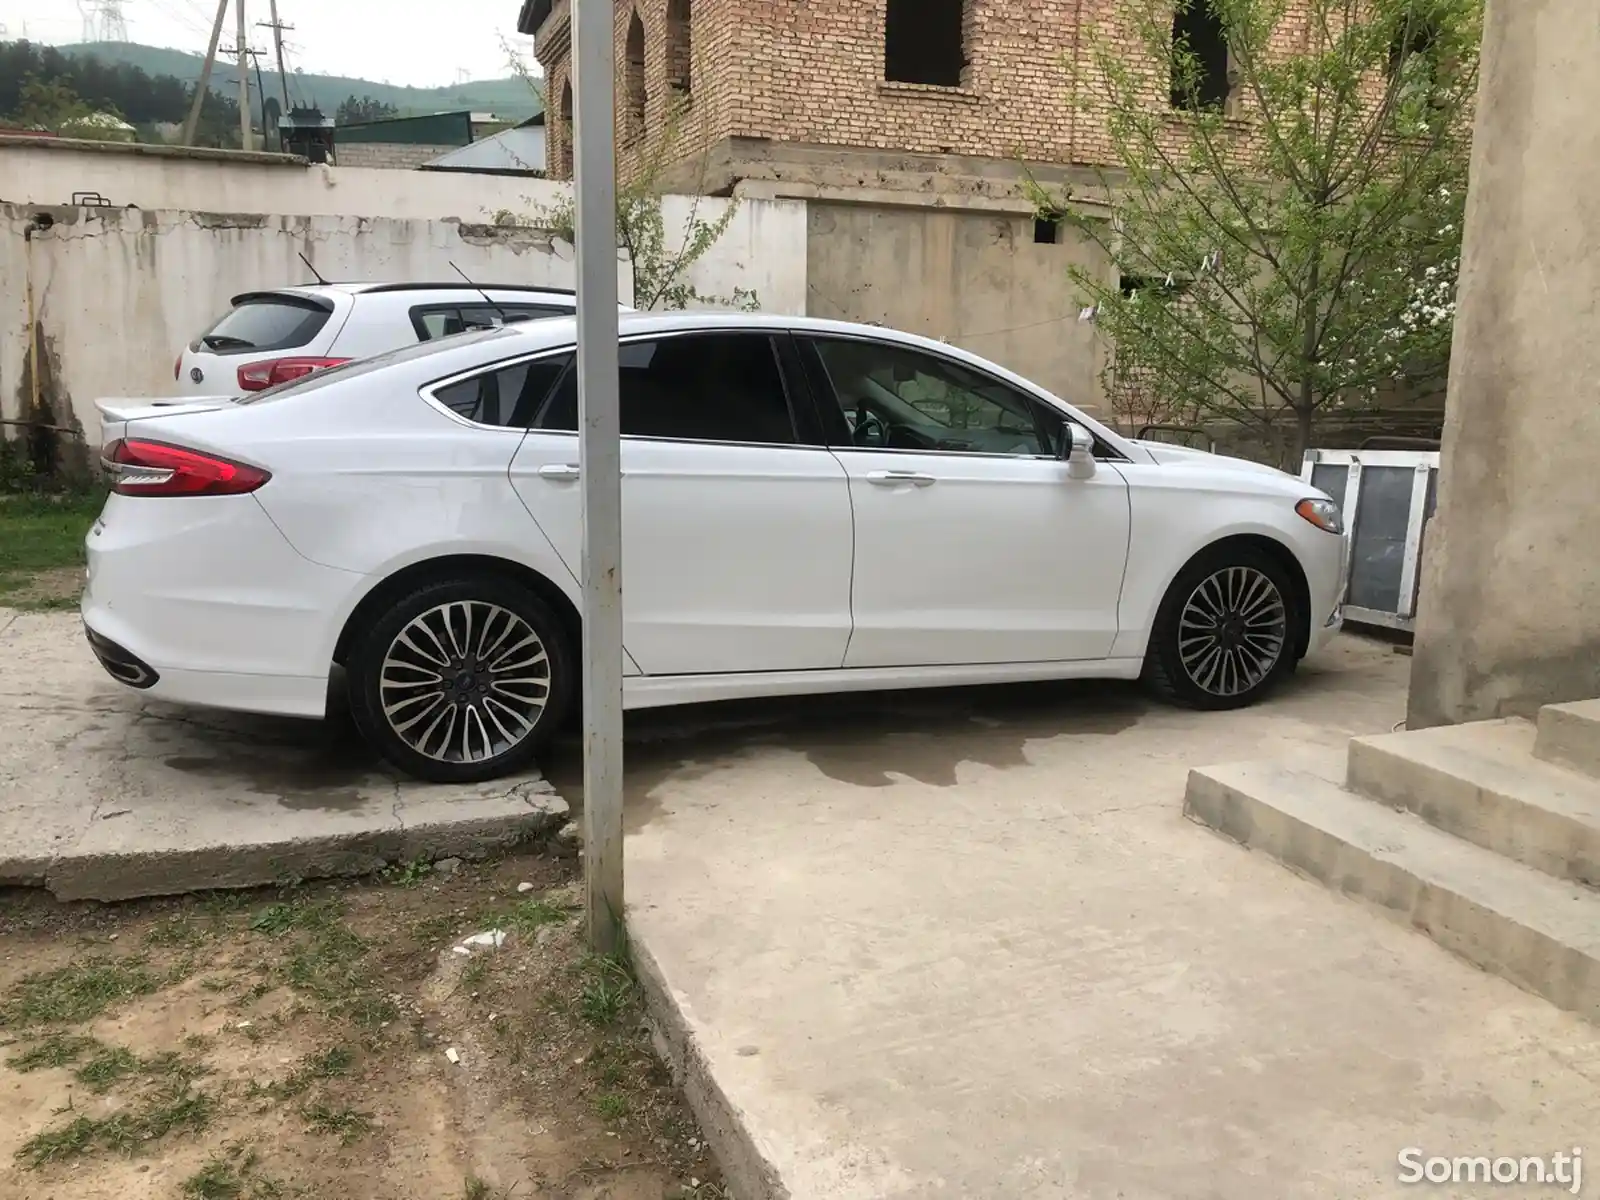 Ford Fusion, 2017-10